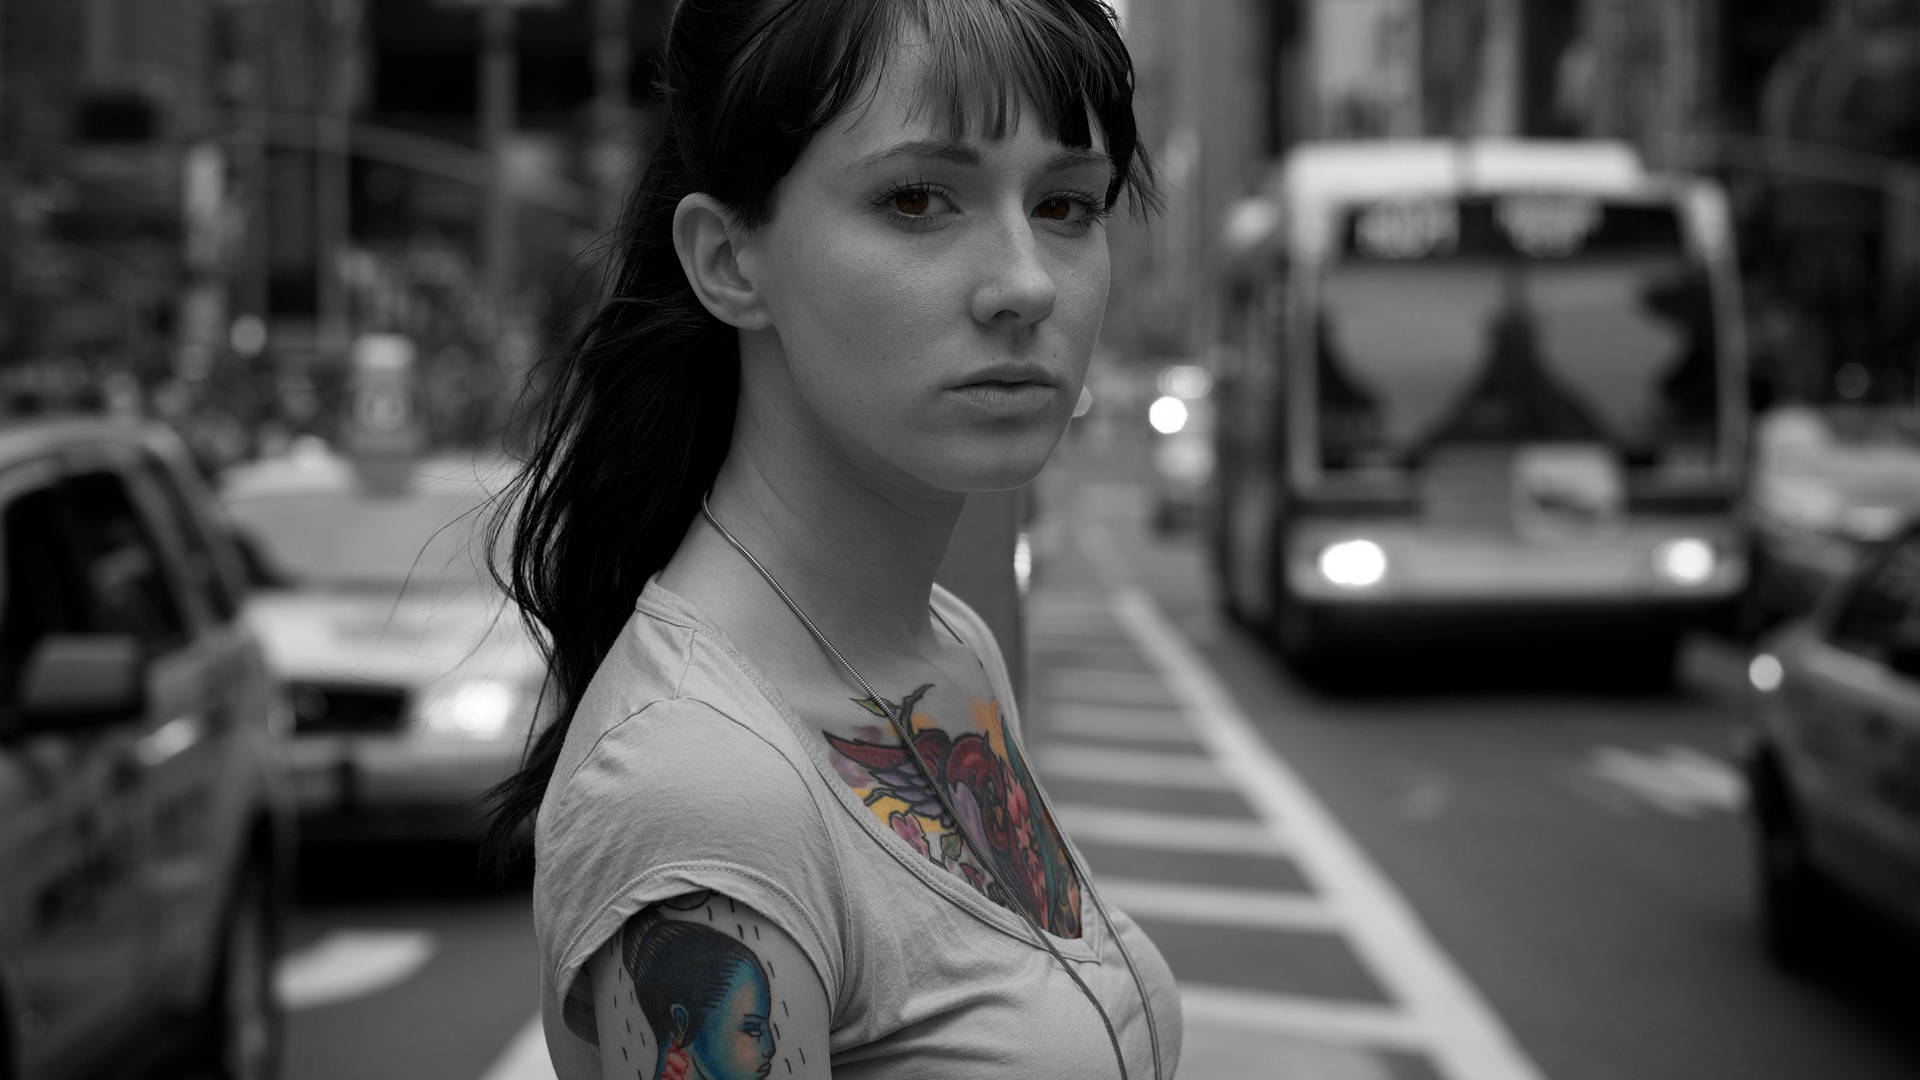 Tattooed Women On Time Square Nyc Wallpaper